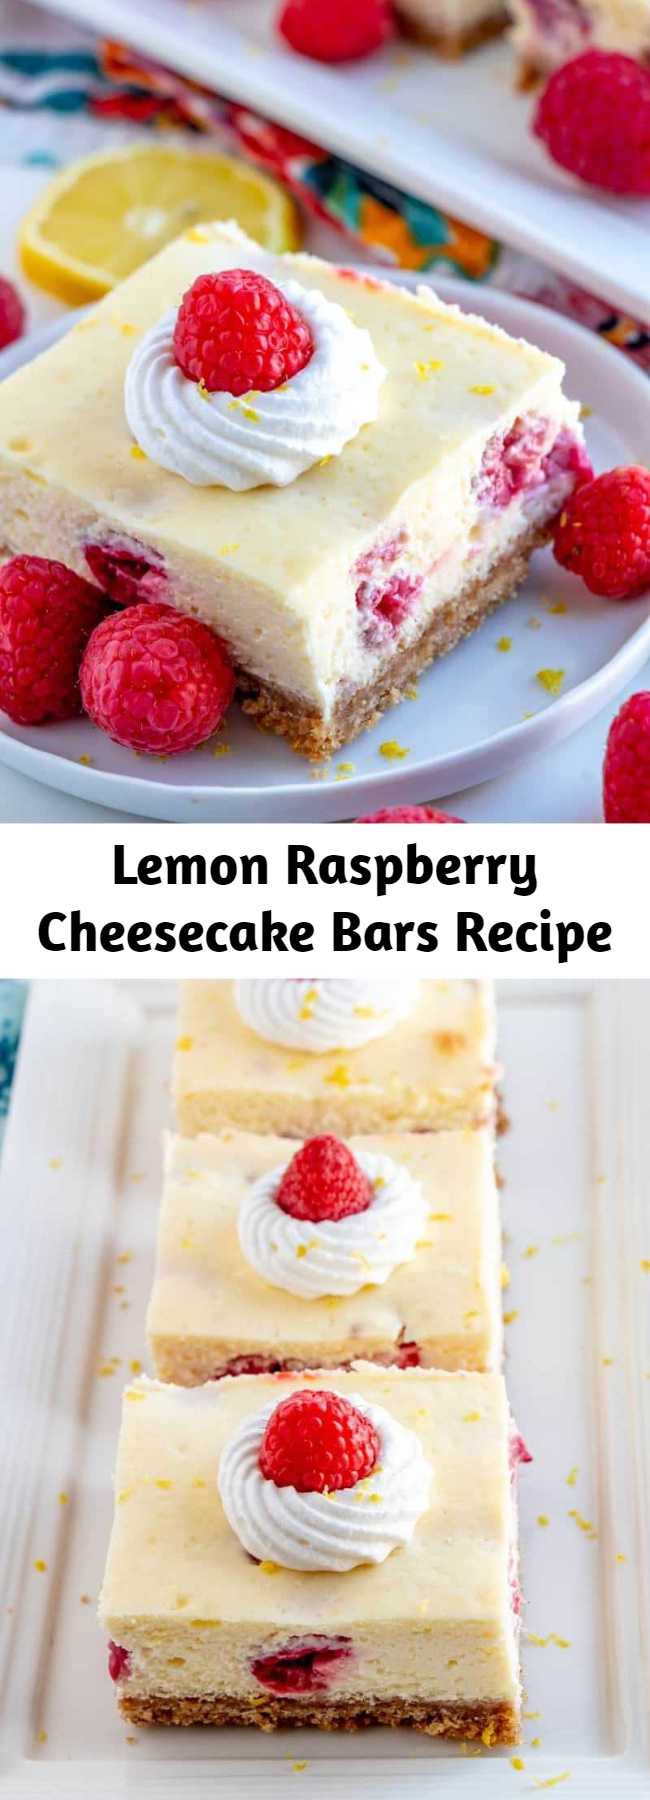 Lemon Raspberry Cheesecake Bars Recipe - Creamy, and delicious these Lemon Raspberry Cheesecake Bars are packed full of lemon, fresh raspberries and topped with a dollop of whipped cream, the perfect dessert for Spring and Summer! #cheesecake #bars #lemon #raspberry #dessert #sweets